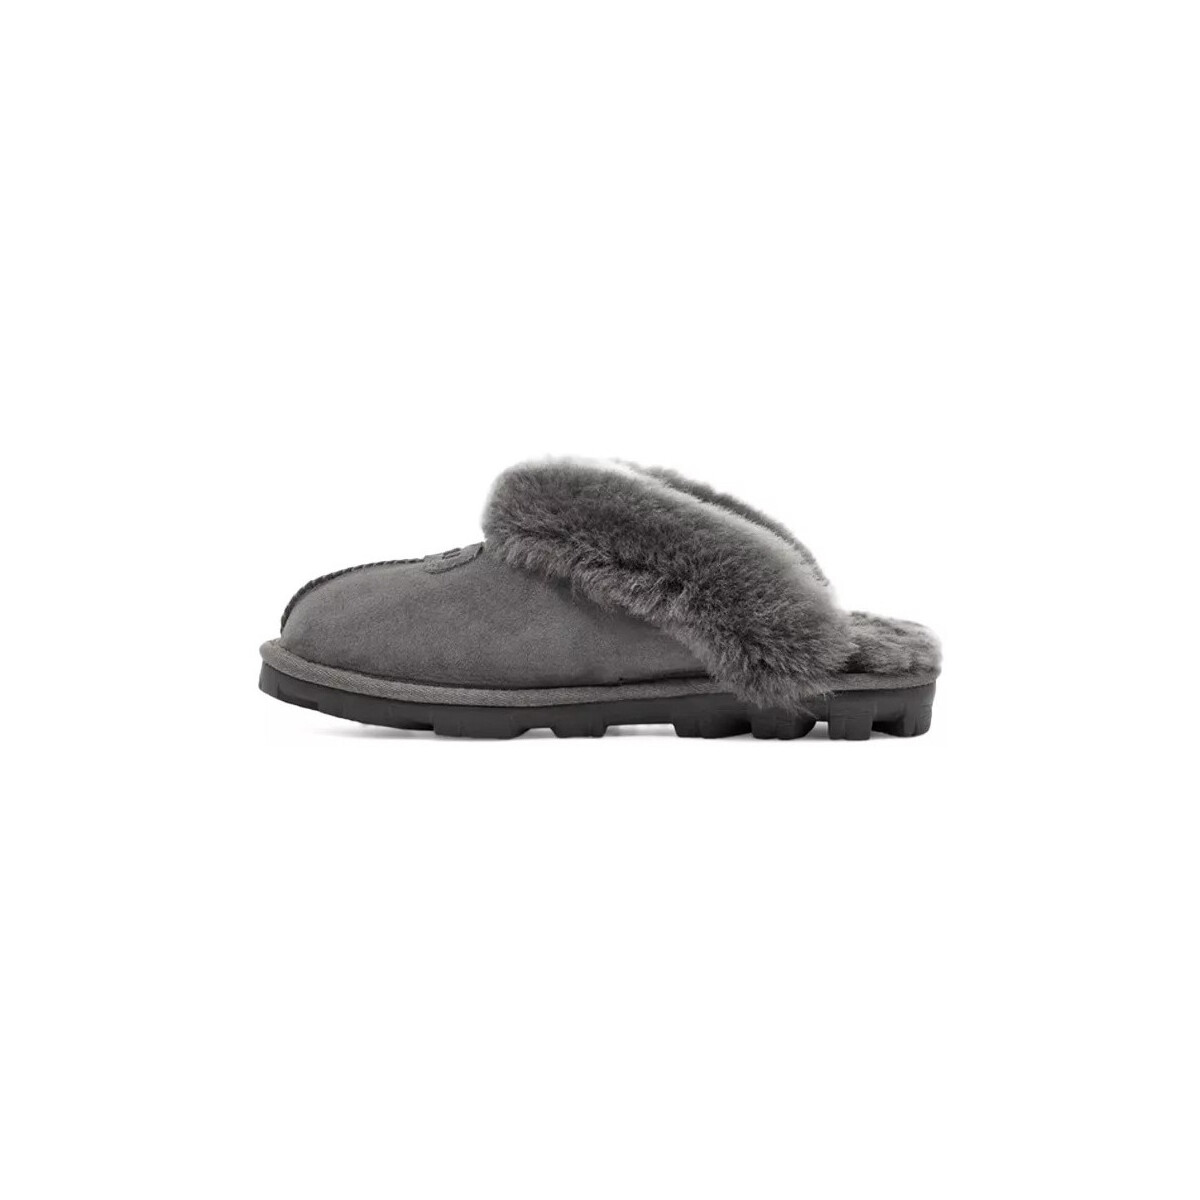 Chaussures Men Chaussons UGG Chausson Mules  COQUETTE Gris